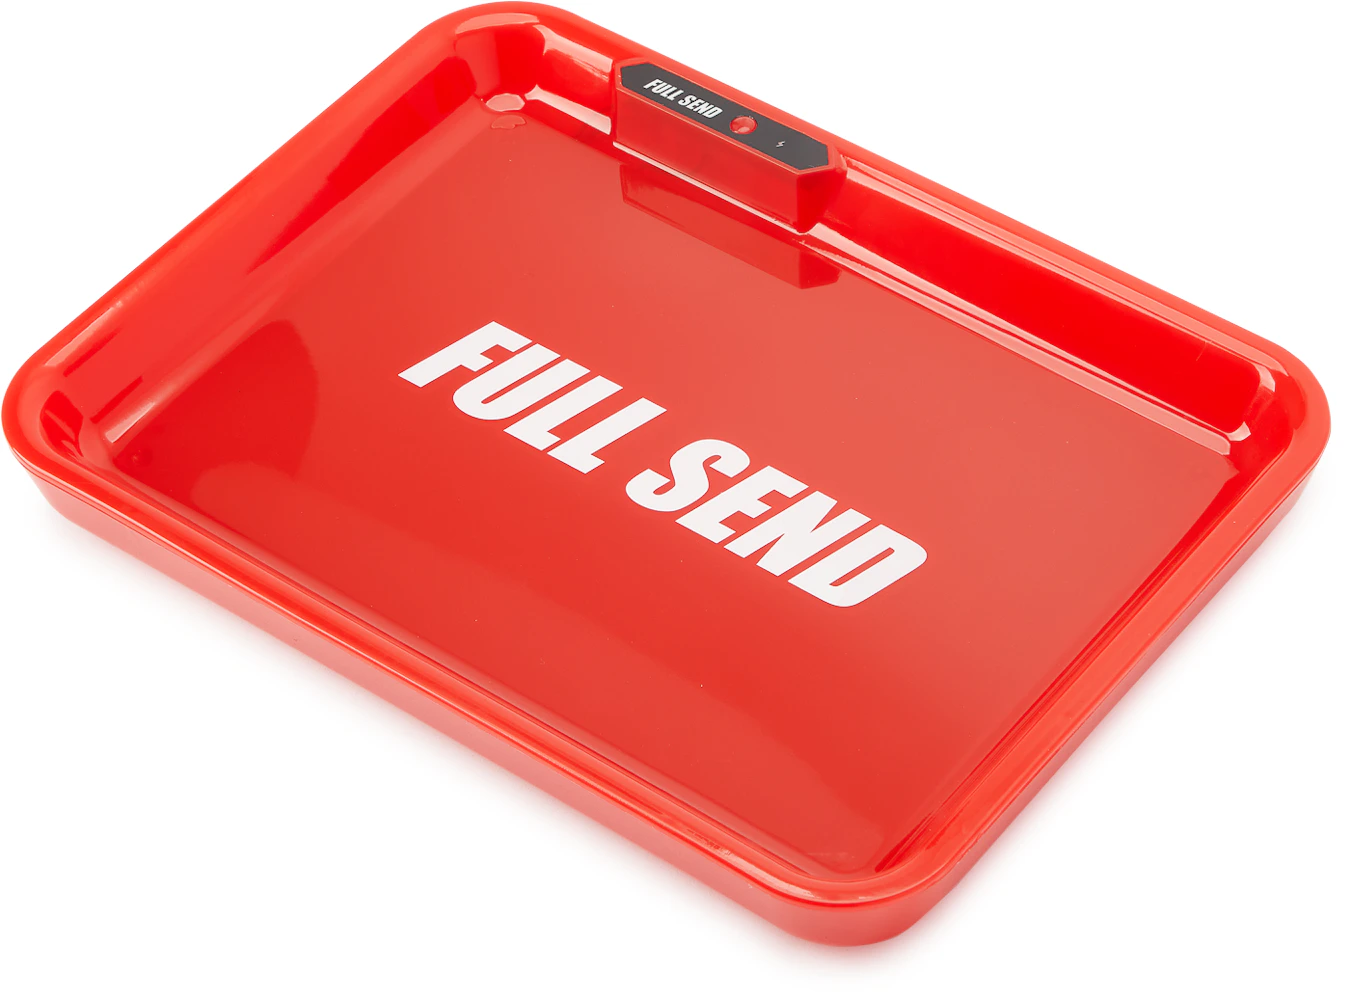 Full Send Luminous Rolling Tray Red - SS21 - US